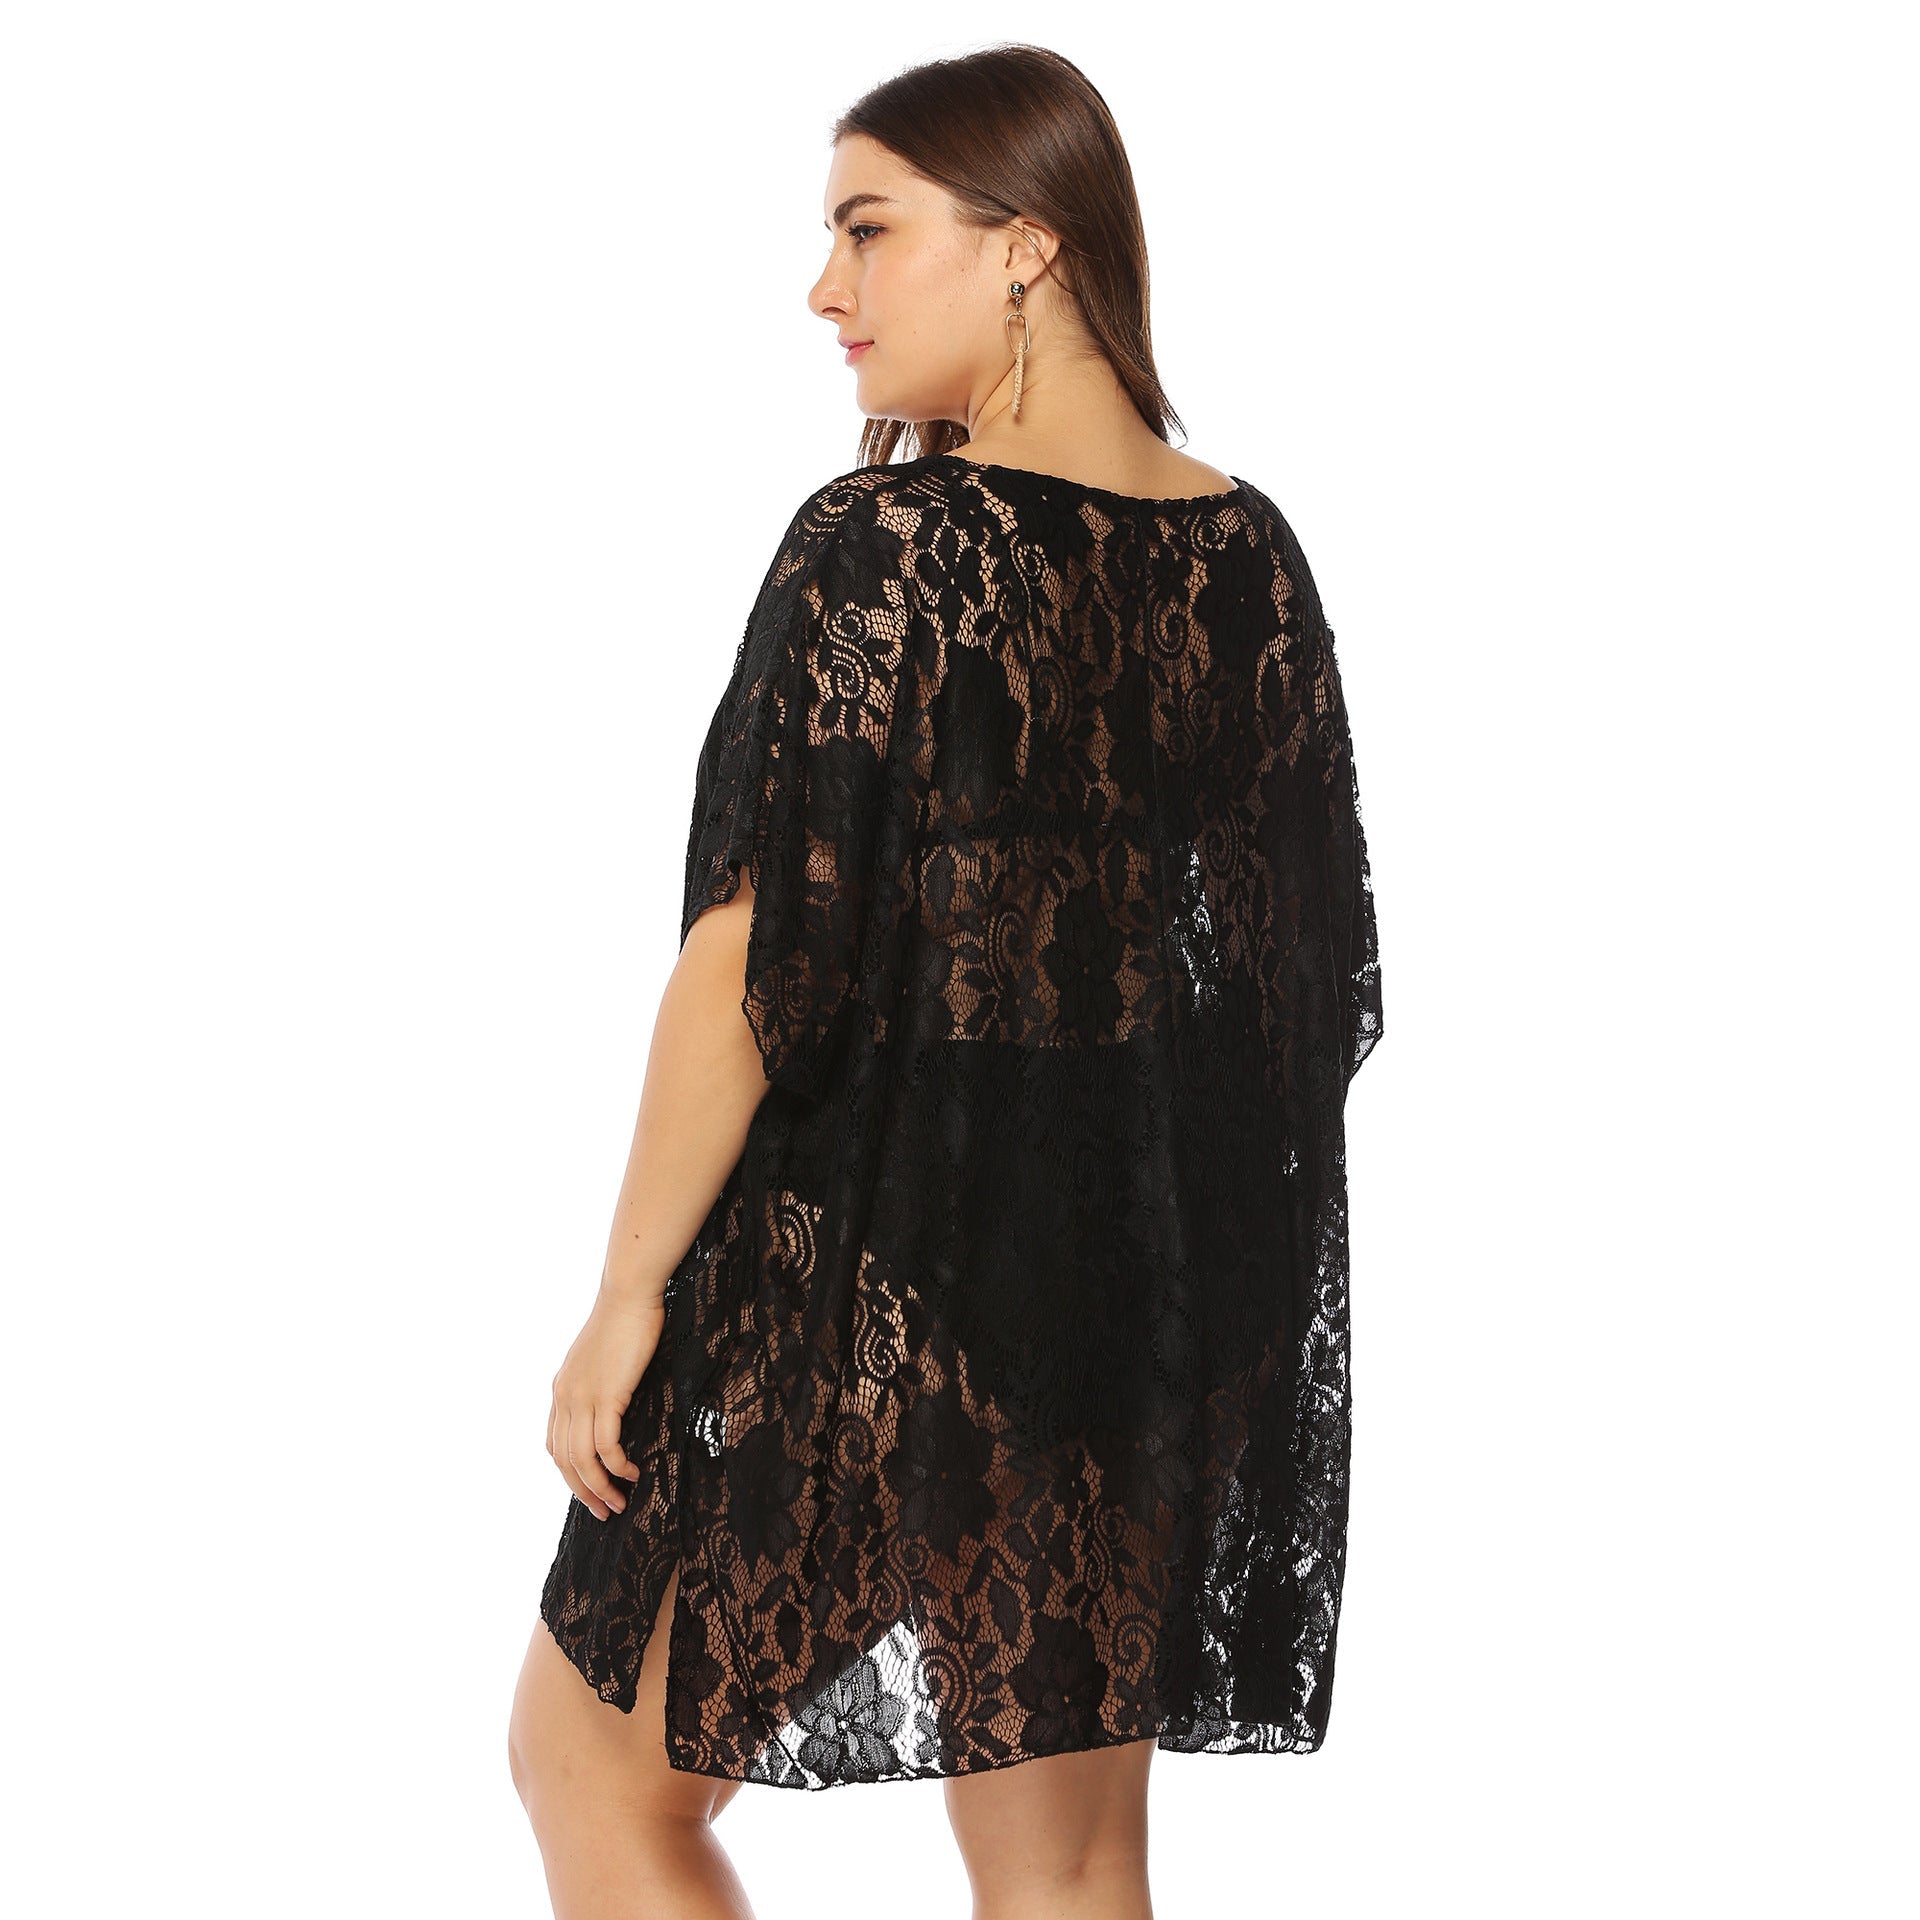 Sexy Lace See Through Plus Sizes Summer Beach Cover Ups-Swimwear-Free Shipping at meselling99